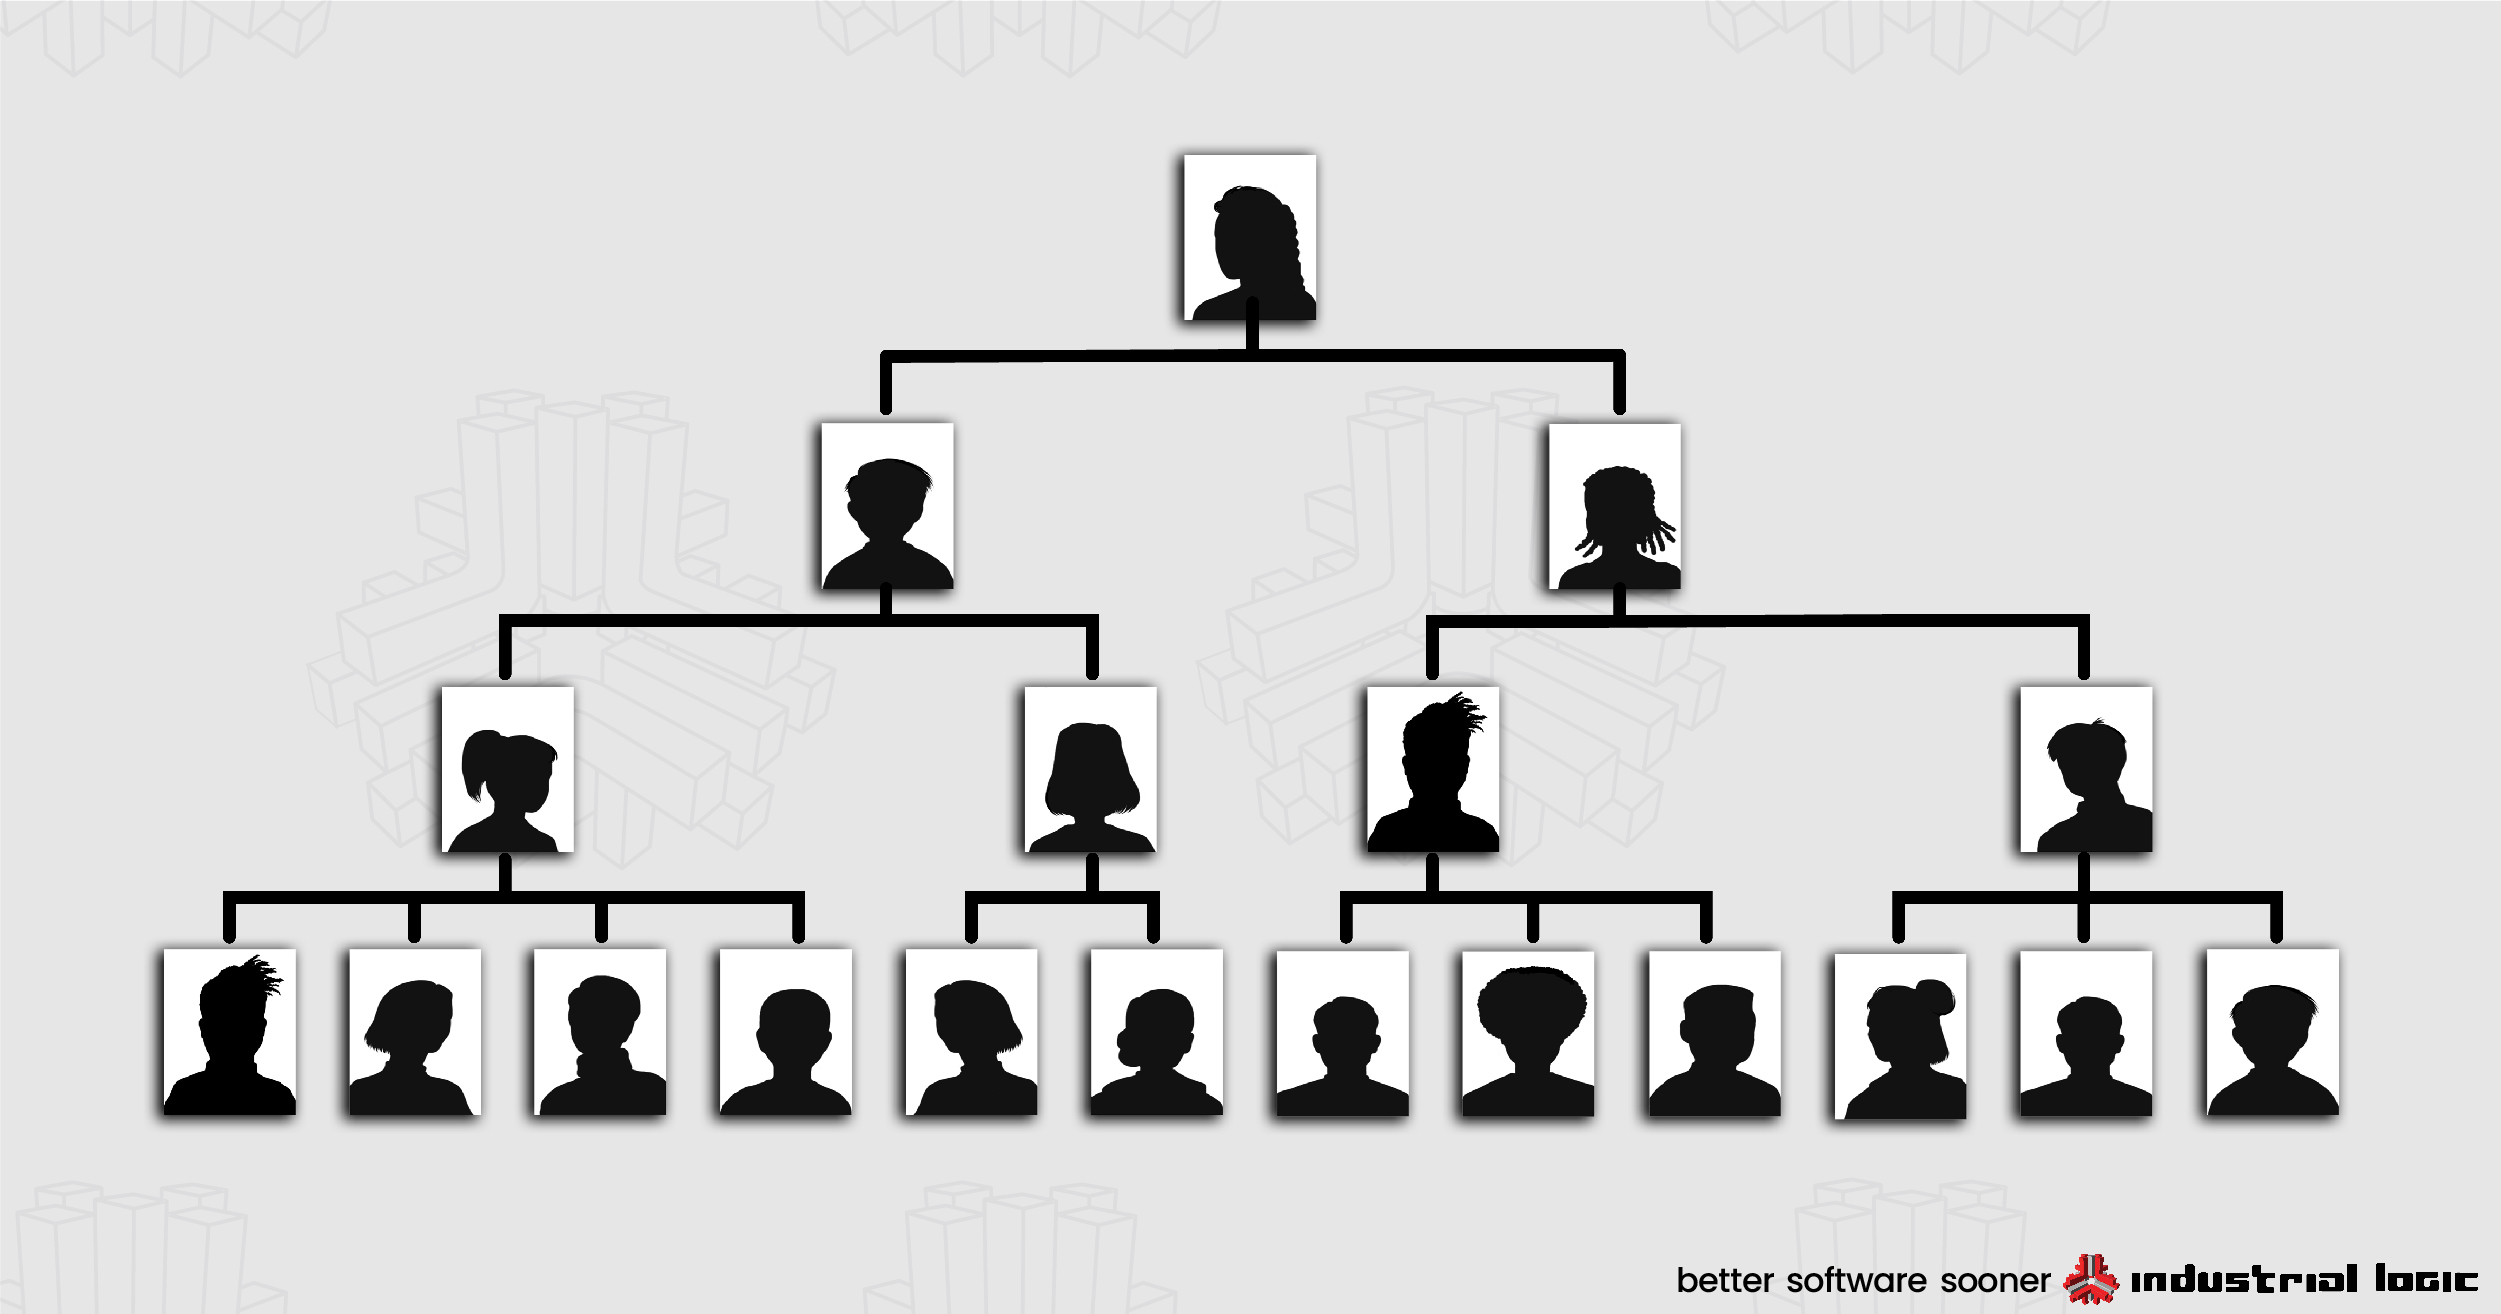 A traditional 20th-century upside-down tree sort of organizational chart